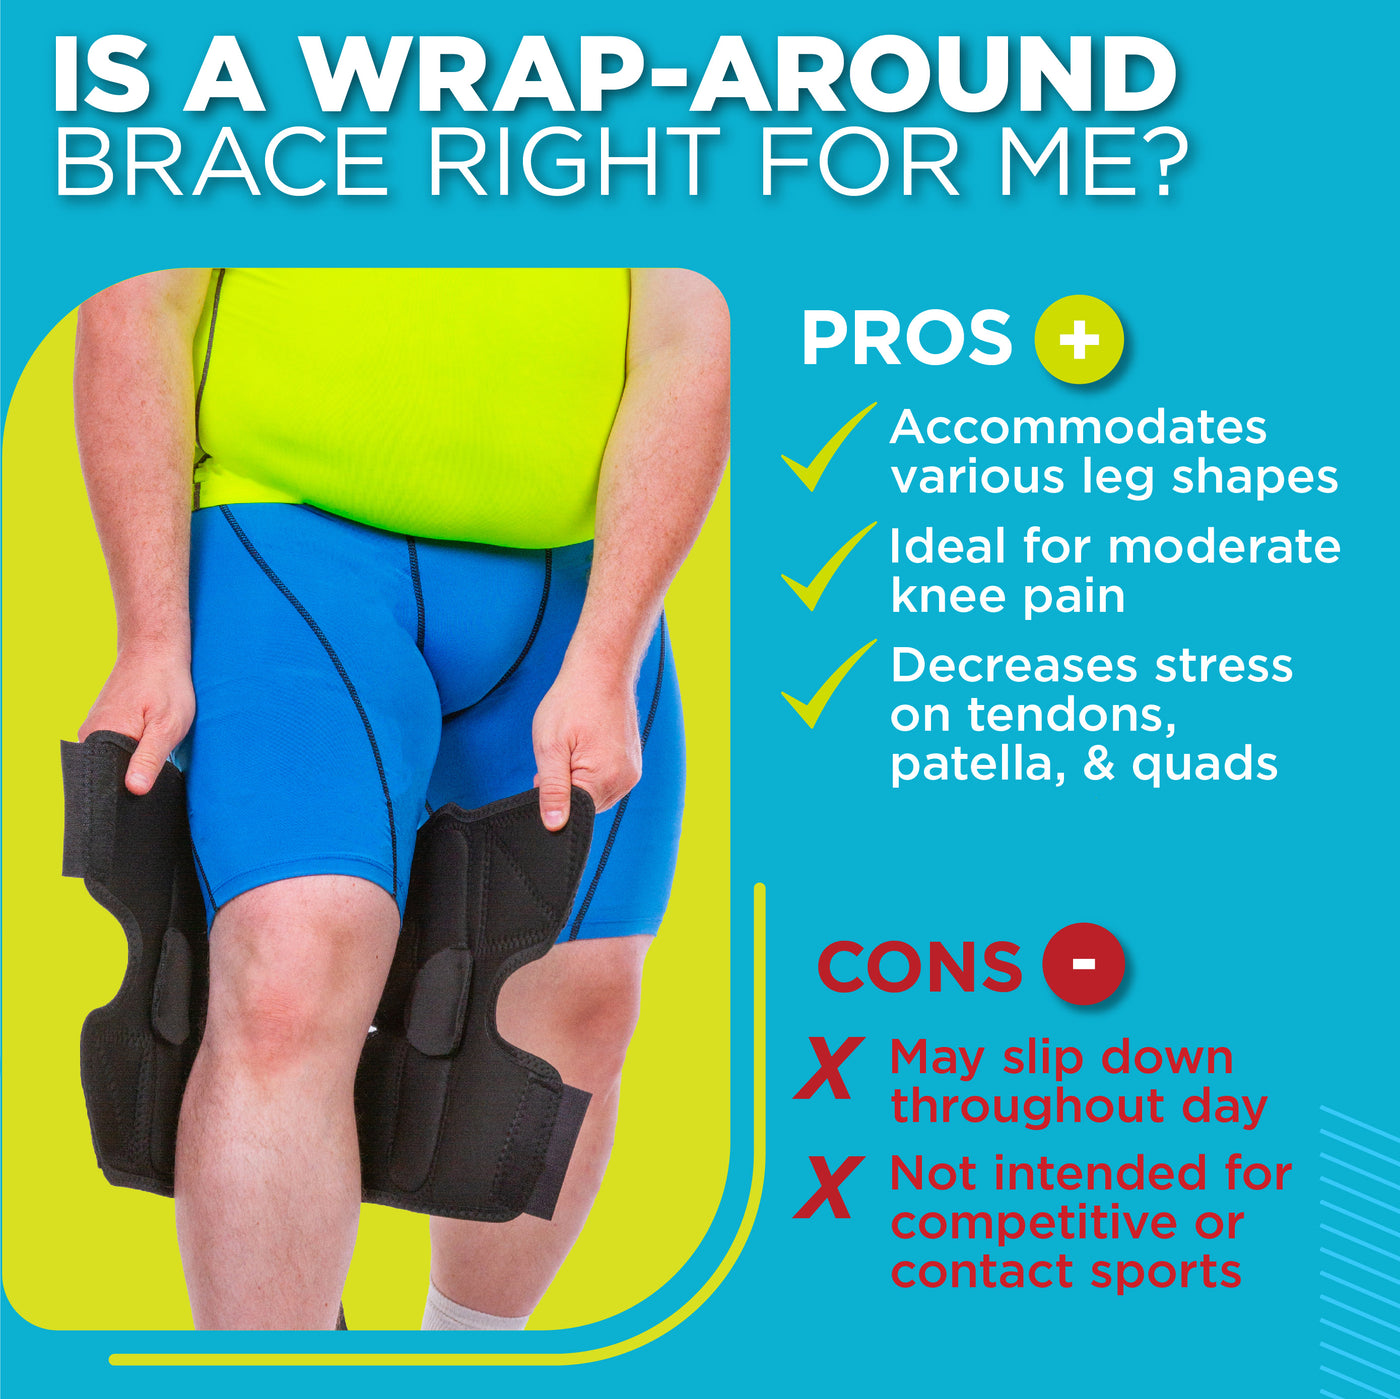 A wrap-around knee brace for obese legs helps accomodate various leg shapes and is ideal for moderate knee pain